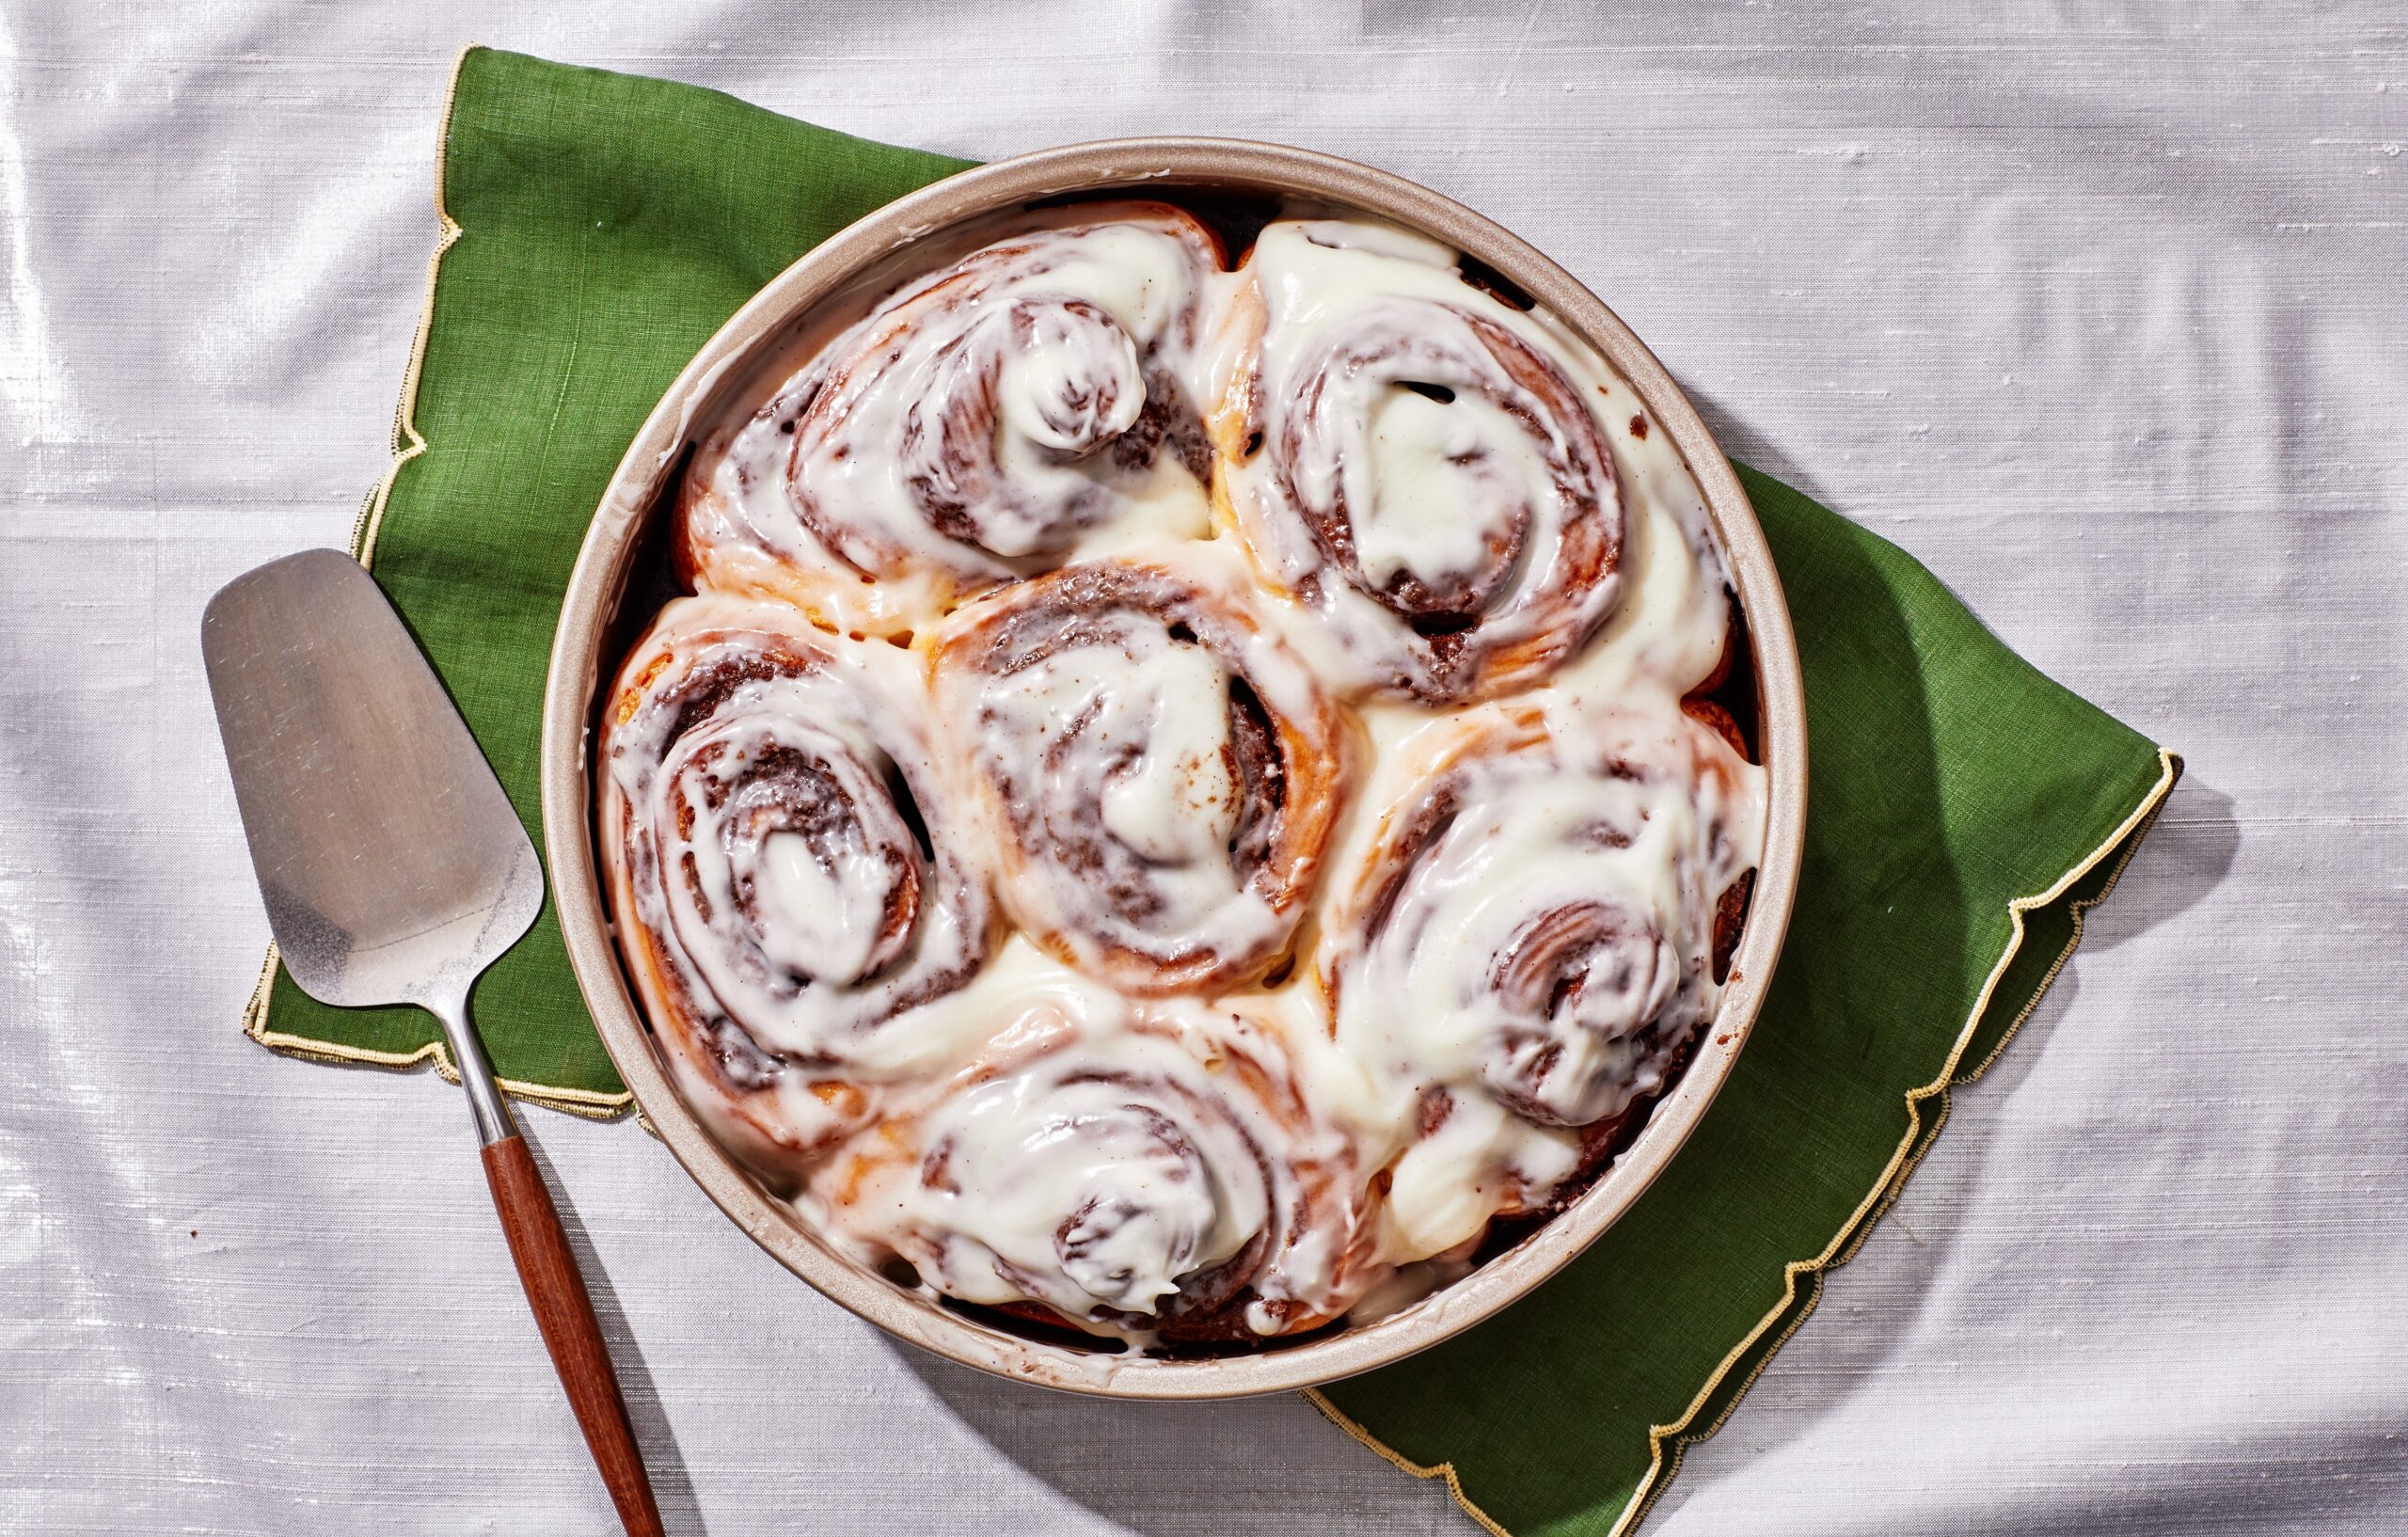 extra-fluffy-cinnamon-rolls-with-cream-cheese-frosting